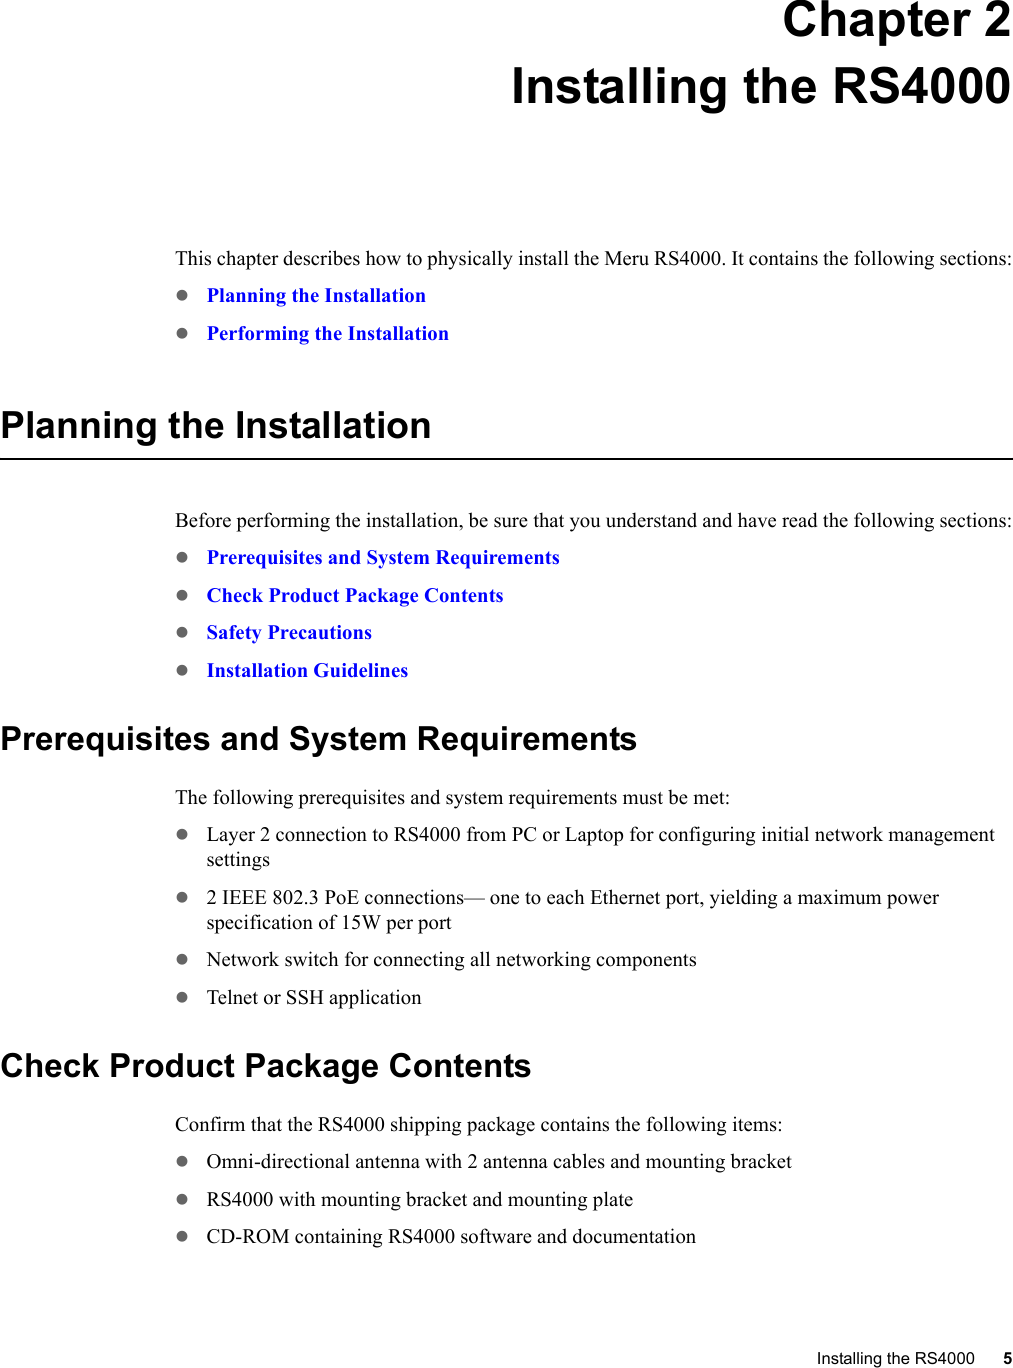 Installing the RS4000 5 Chapter 2Installing the RS4000This chapter describes how to physically install the Meru RS4000. It contains the following sections:zPlanning the InstallationzPerforming the InstallationPlanning the InstallationBefore performing the installation, be sure that you understand and have read the following sections:zPrerequisites and System RequirementszCheck Product Package ContentszSafety PrecautionszInstallation GuidelinesPrerequisites and System RequirementsThe following prerequisites and system requirements must be met:zLayer 2 connection to RS4000 from PC or Laptop for configuring initial network management settingsz2 IEEE 802.3 PoE connections— one to each Ethernet port, yielding a maximum power specification of 15W per portzNetwork switch for connecting all networking componentszTelnet or SSH applicationCheck Product Package ContentsConfirm that the RS4000 shipping package contains the following items:zOmni-directional antenna with 2 antenna cables and mounting bracketzRS4000 with mounting bracket and mounting platezCD-ROM containing RS4000 software and documentation